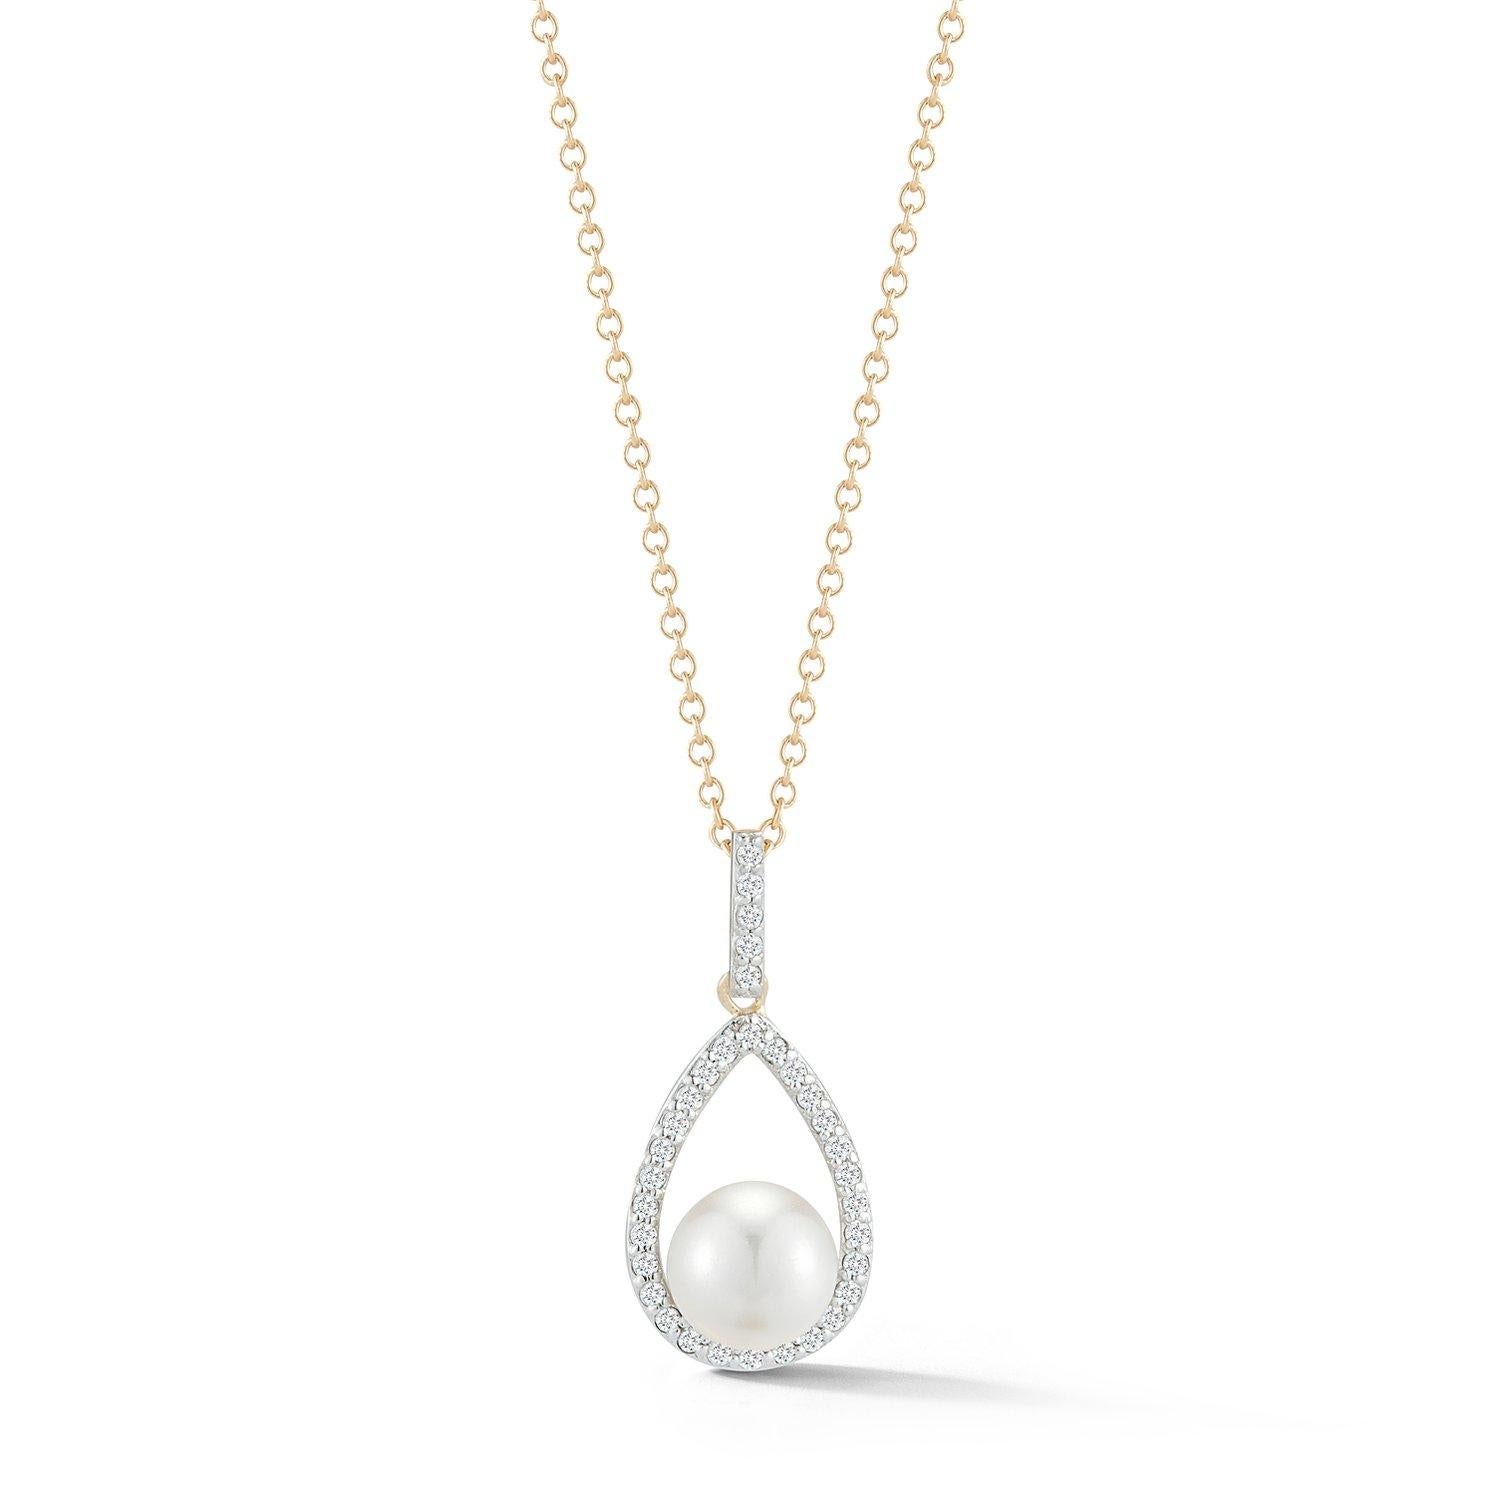 Simple, elegant and timeless in design, this is the perfect everyday piece. Mateo continues on the theme of simplicity. 